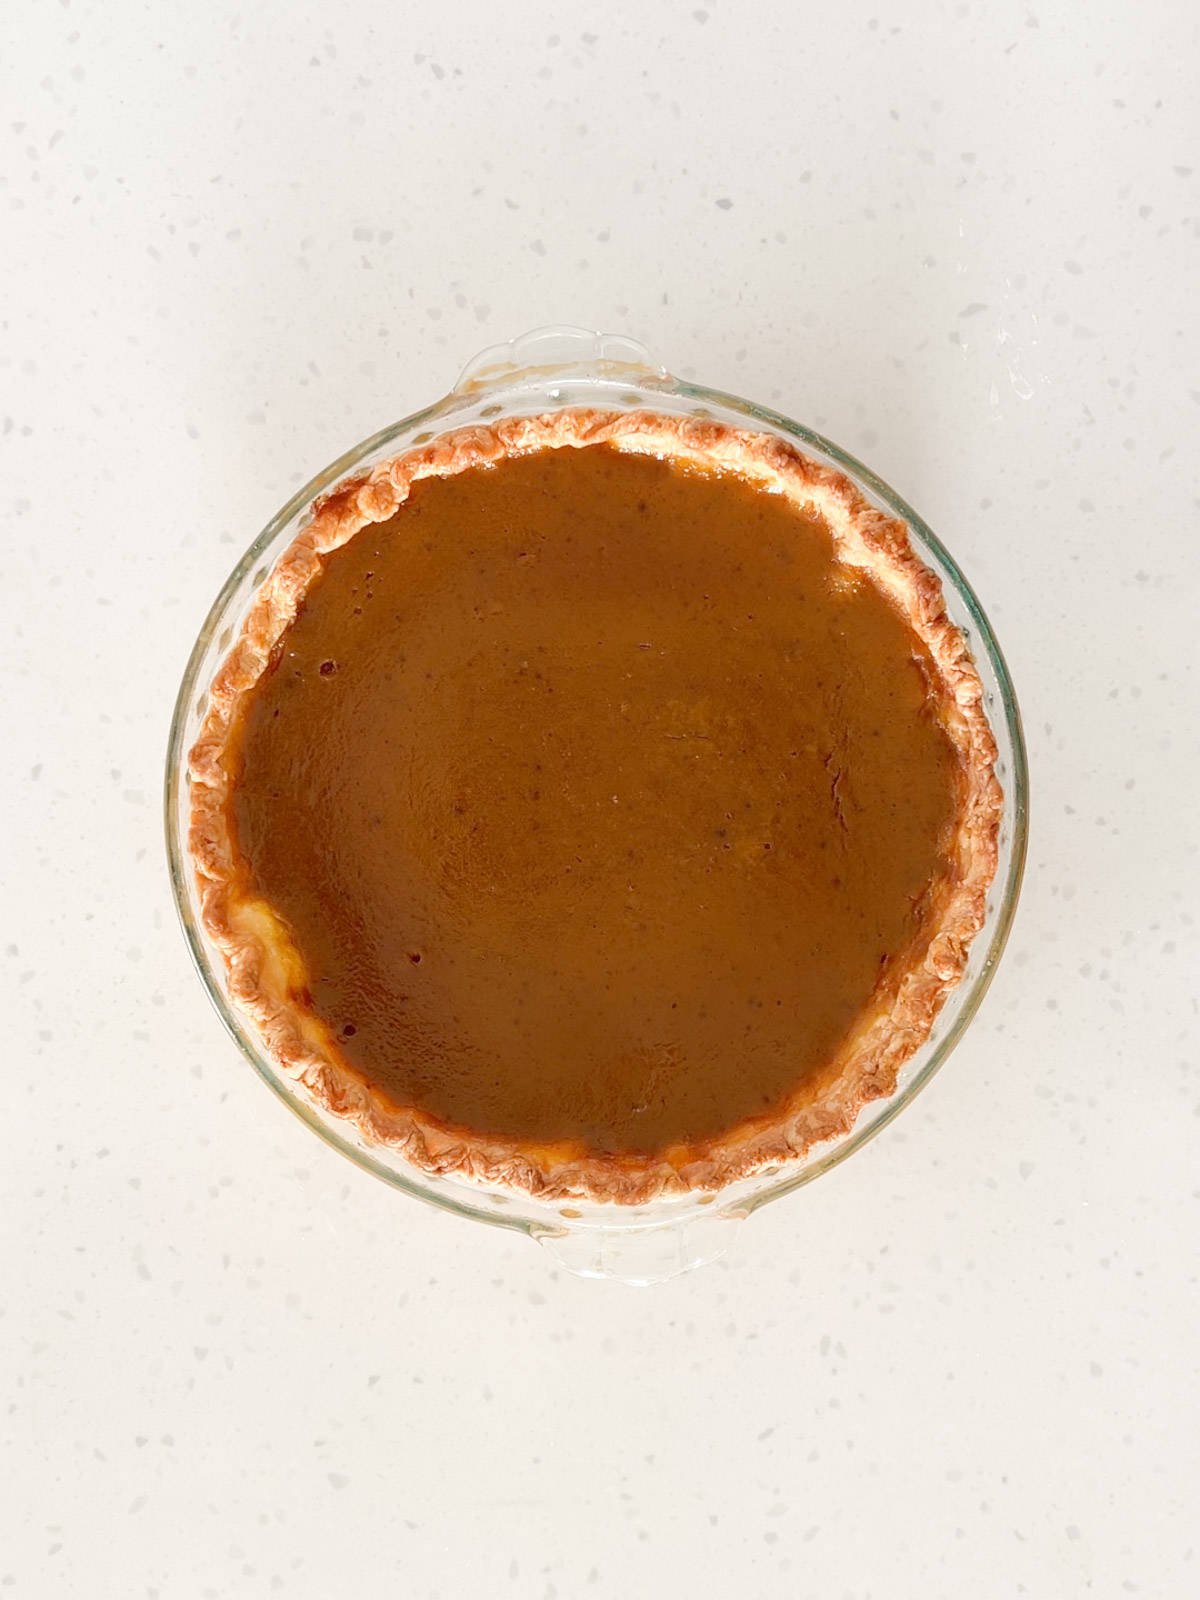 A pumpkin pie is baked until the center is almost set.